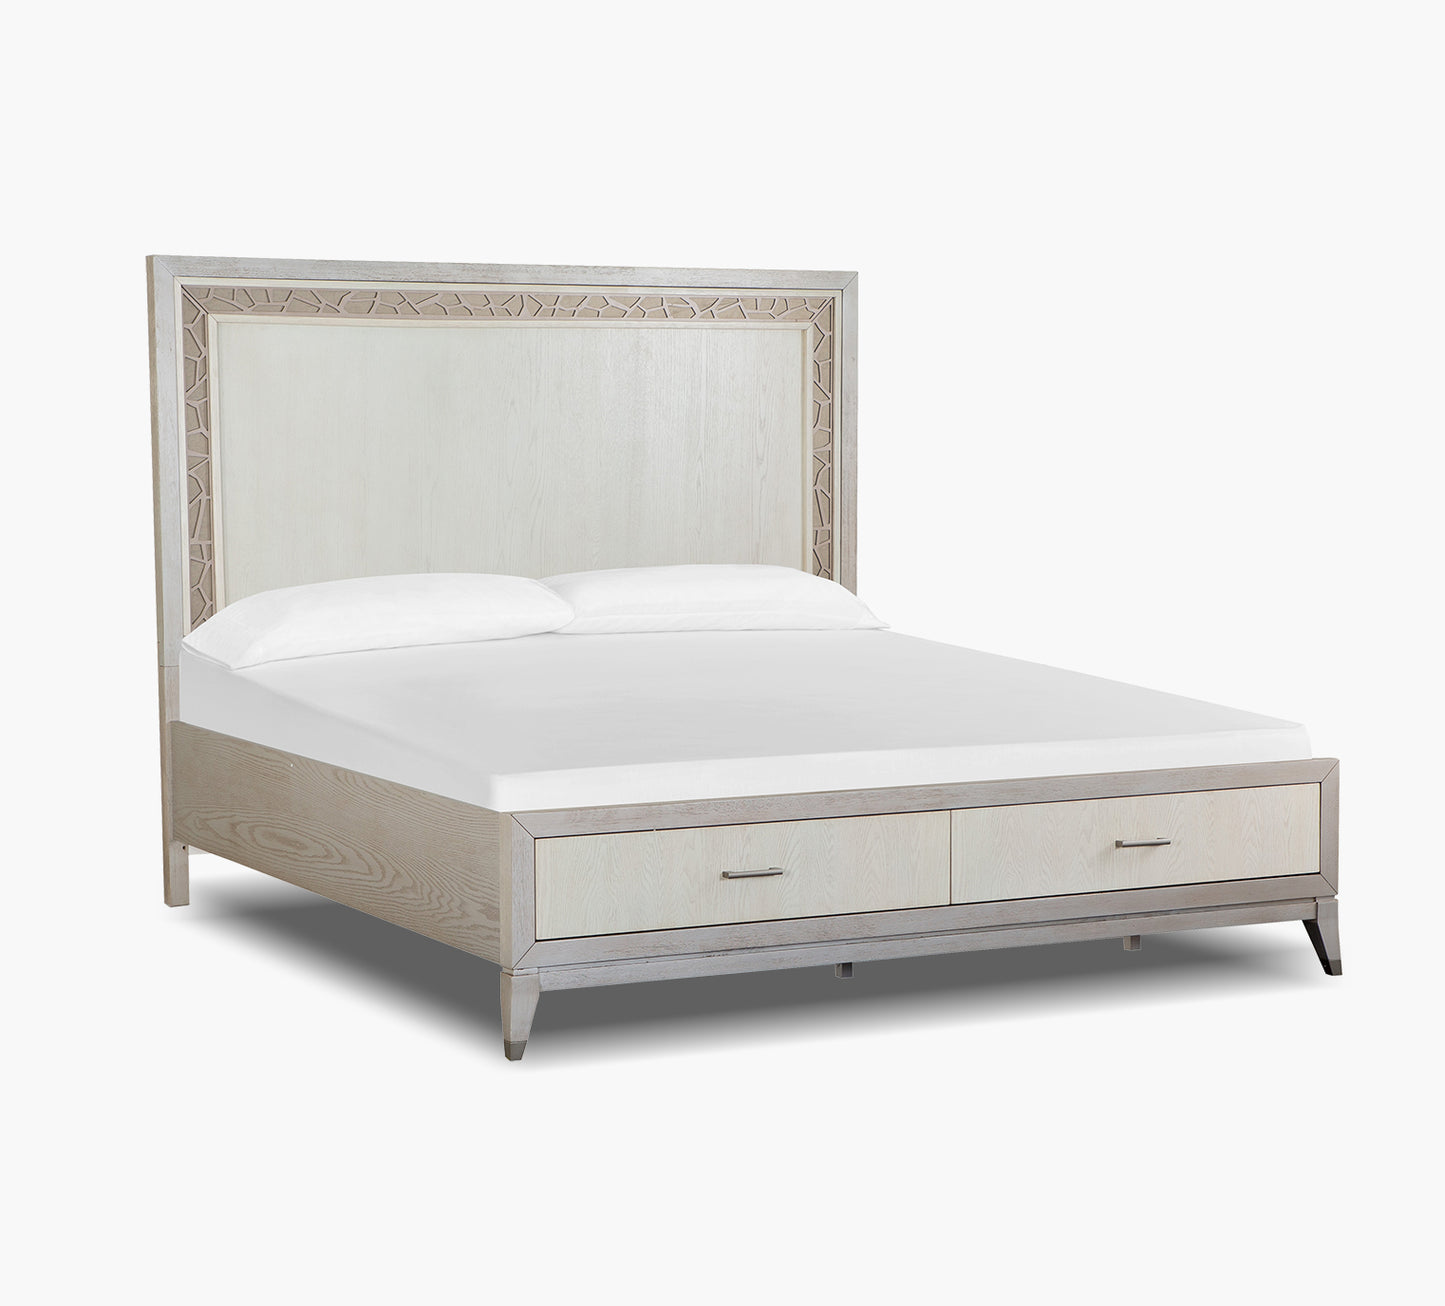 Ryker Champagne King Wood Storage Bed